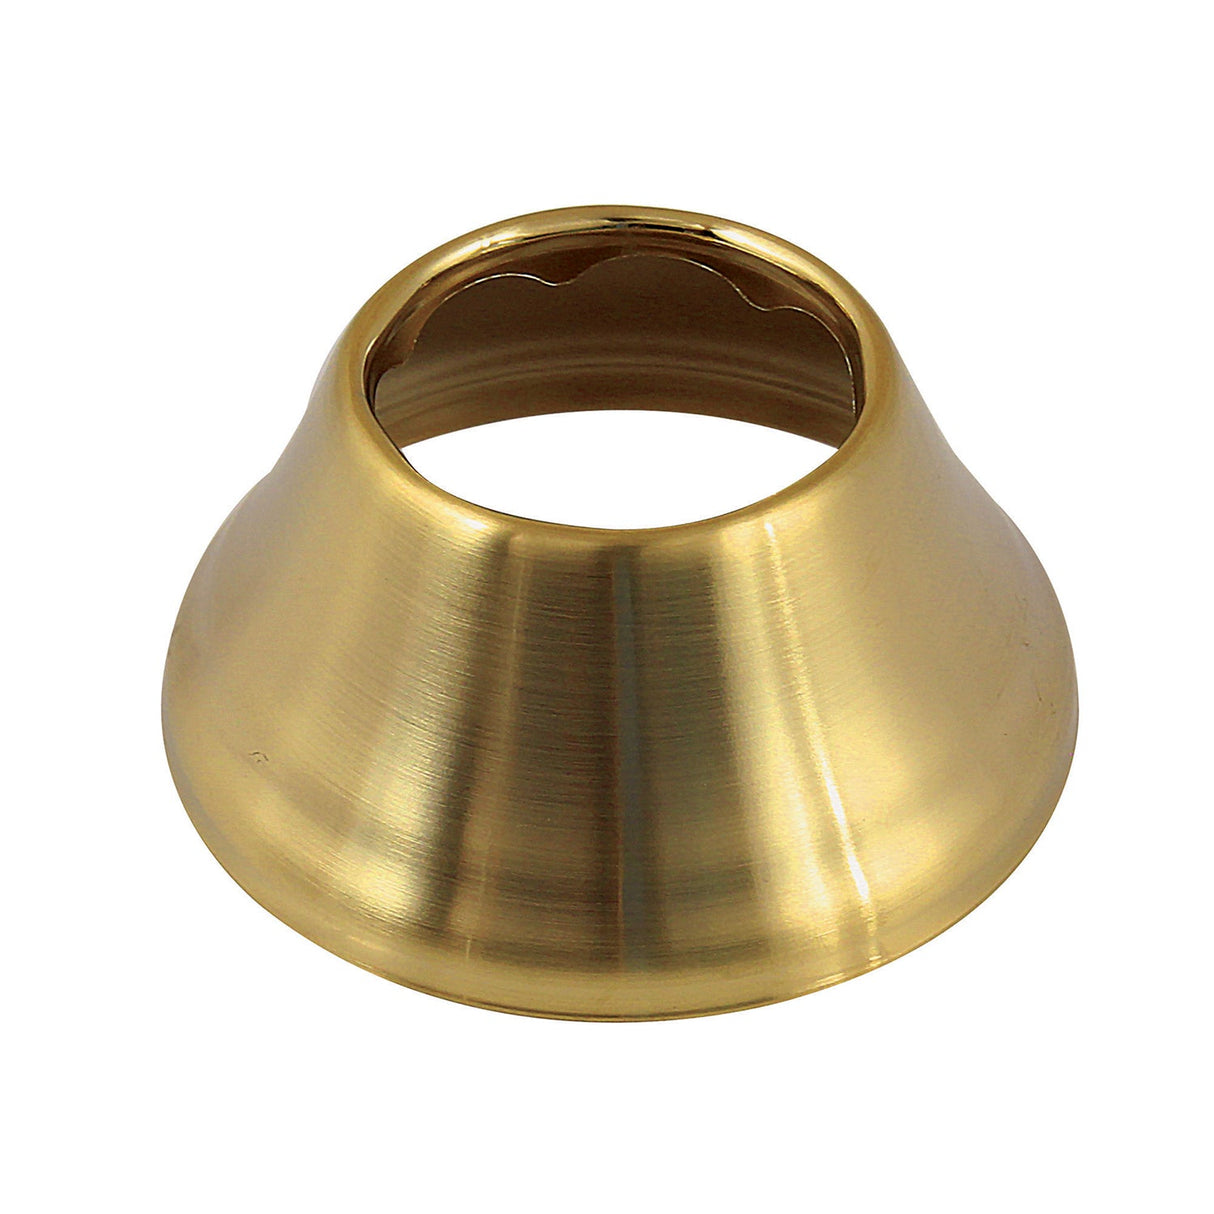 Made To Match FLBELL11237 1-1/2 Inch ID x 3 Inch OD Bell Flange, Brushed Brass